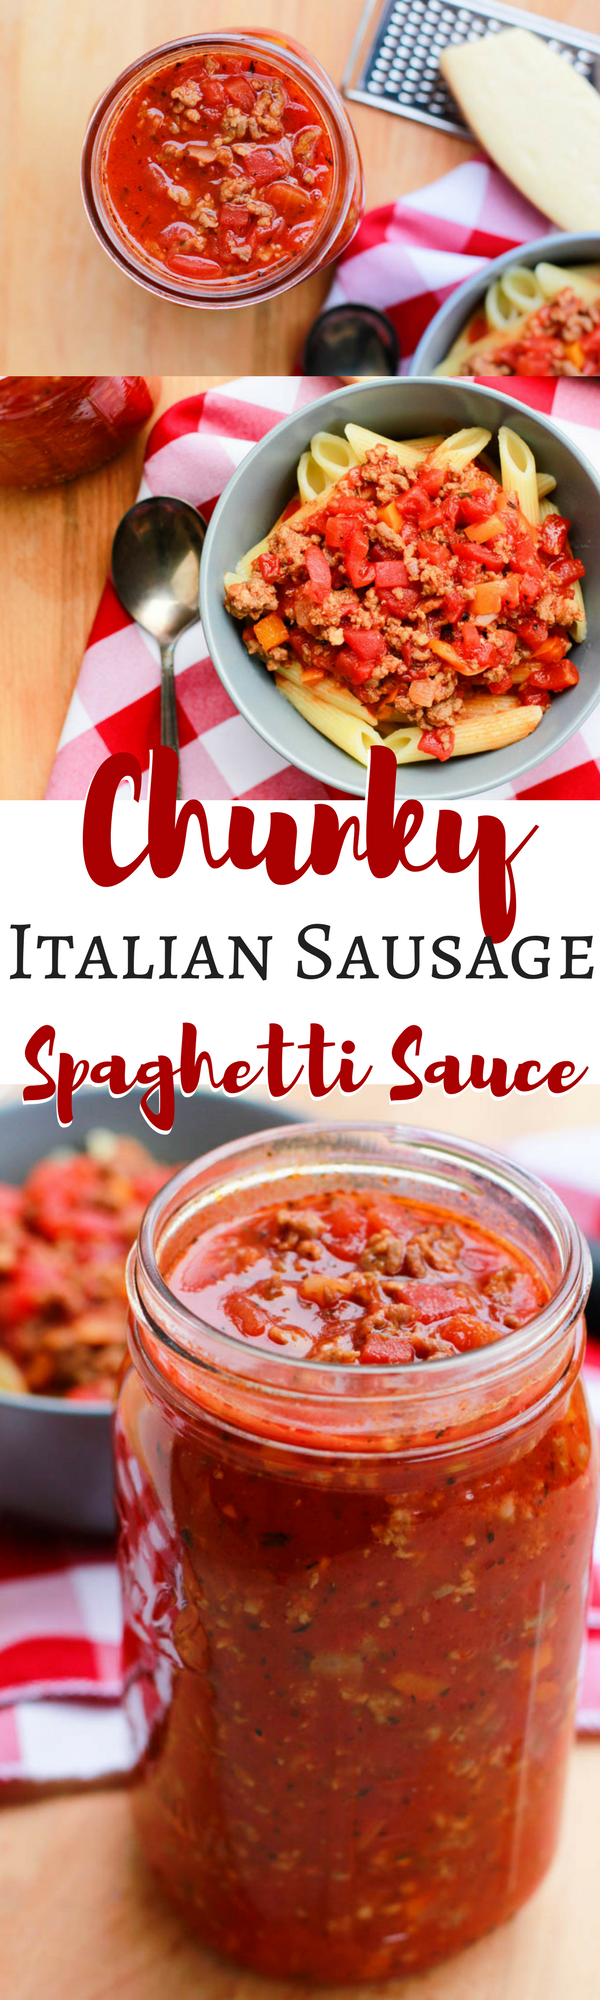 Surprise your family next spaghetti night with this delightfully delicious Chunky Italian Sausage Spaghetti Sauce.